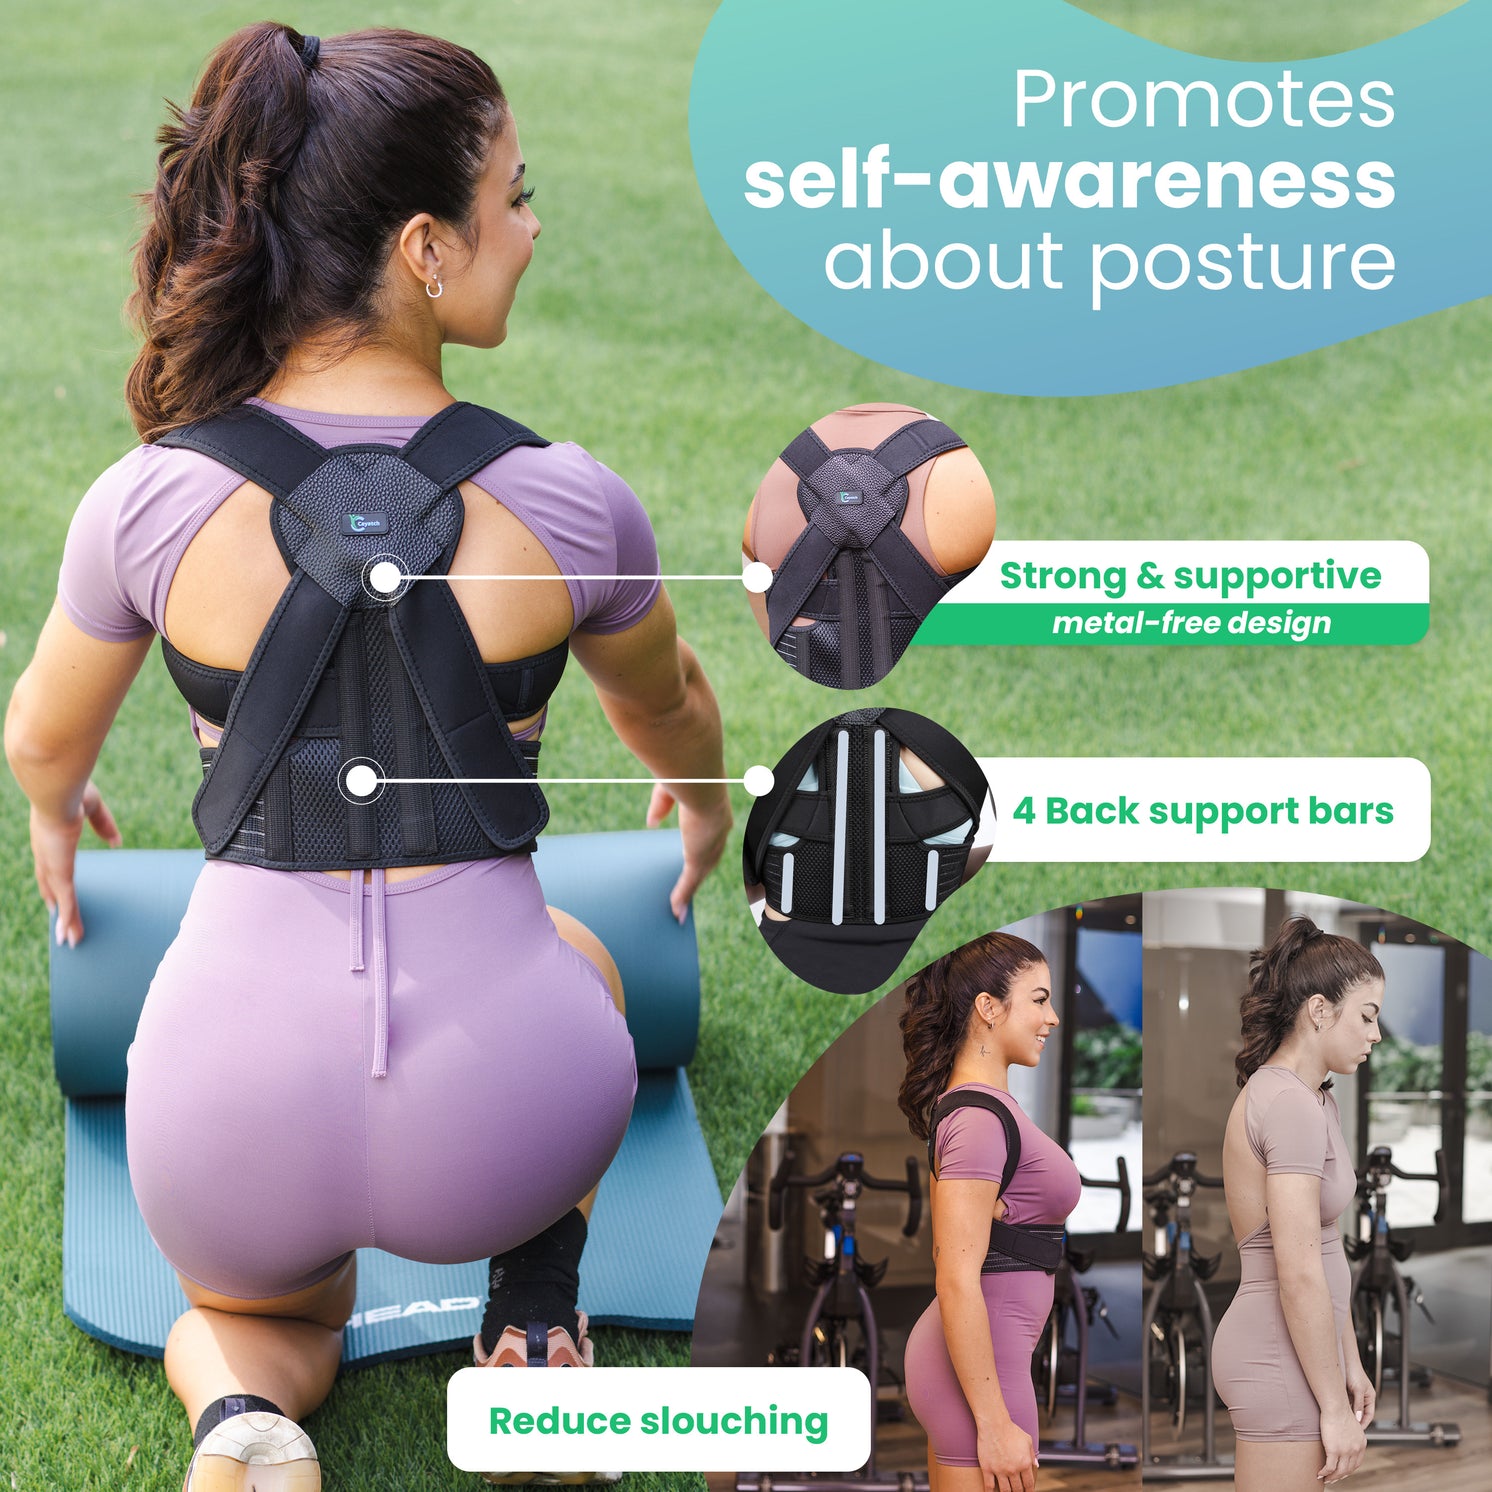 The 3 Best Posture Exercises To Soothe Aches And Pains » The Smart